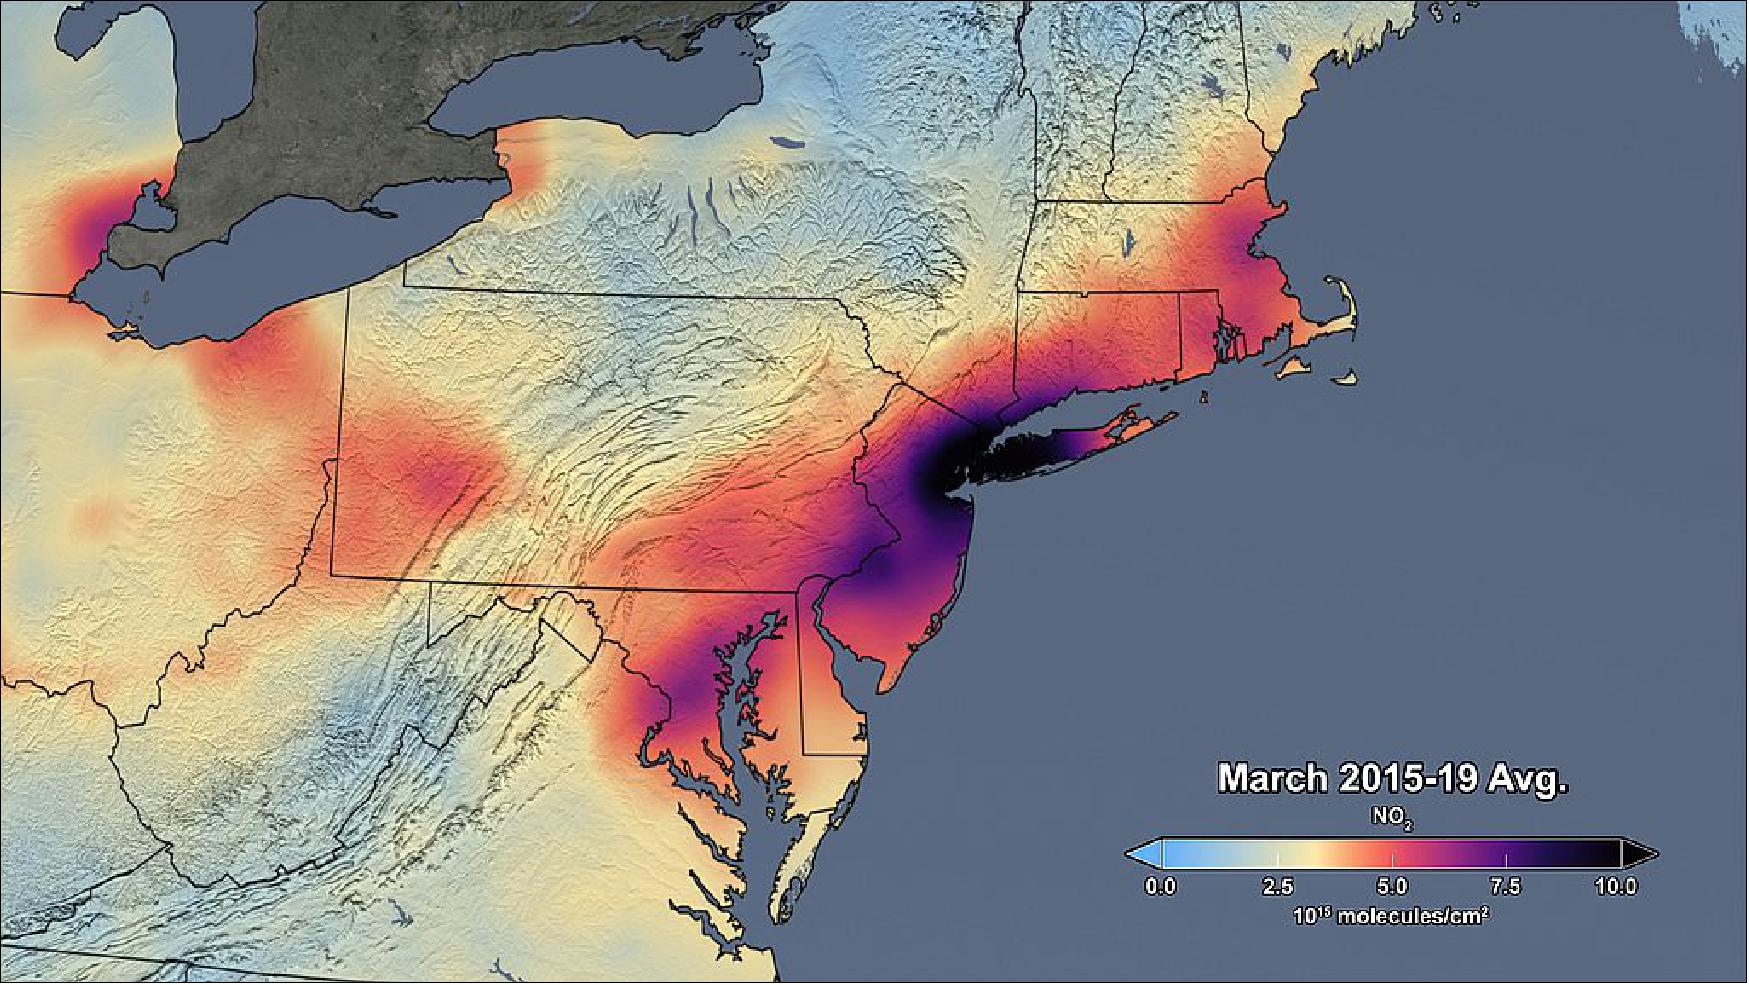 Figure 19: This image shows the average tropospheric NO2 concentration in March of 2015-2019 over the Northeast USA as measured with OMI on NASA's Aura satellite (image credit: NASA)